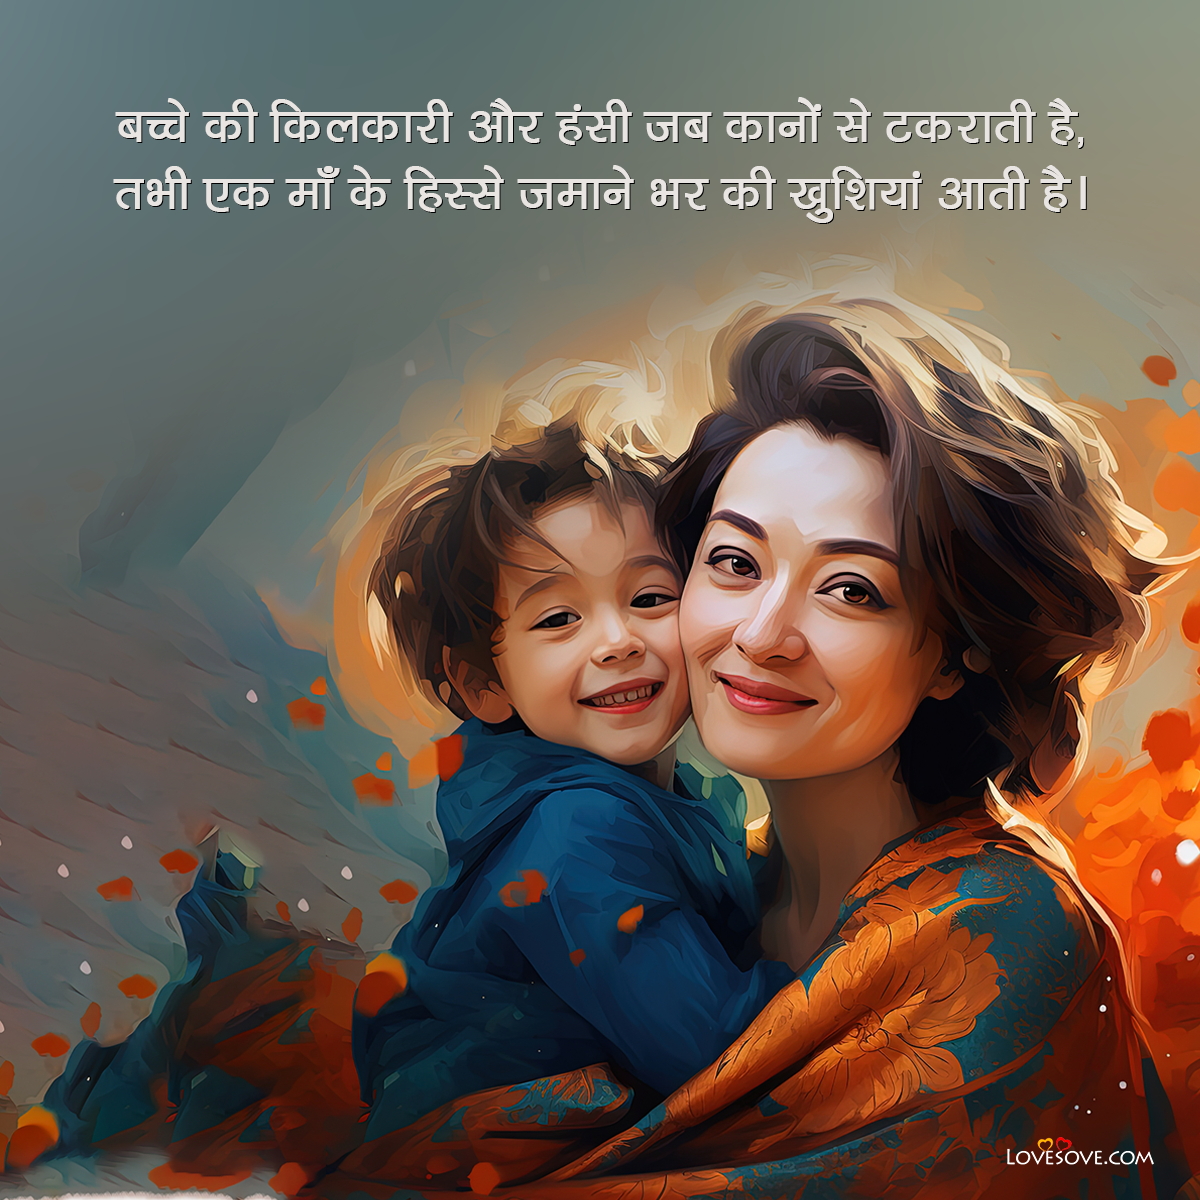 Mother Son beautiful lines lovesove 1, Relationships